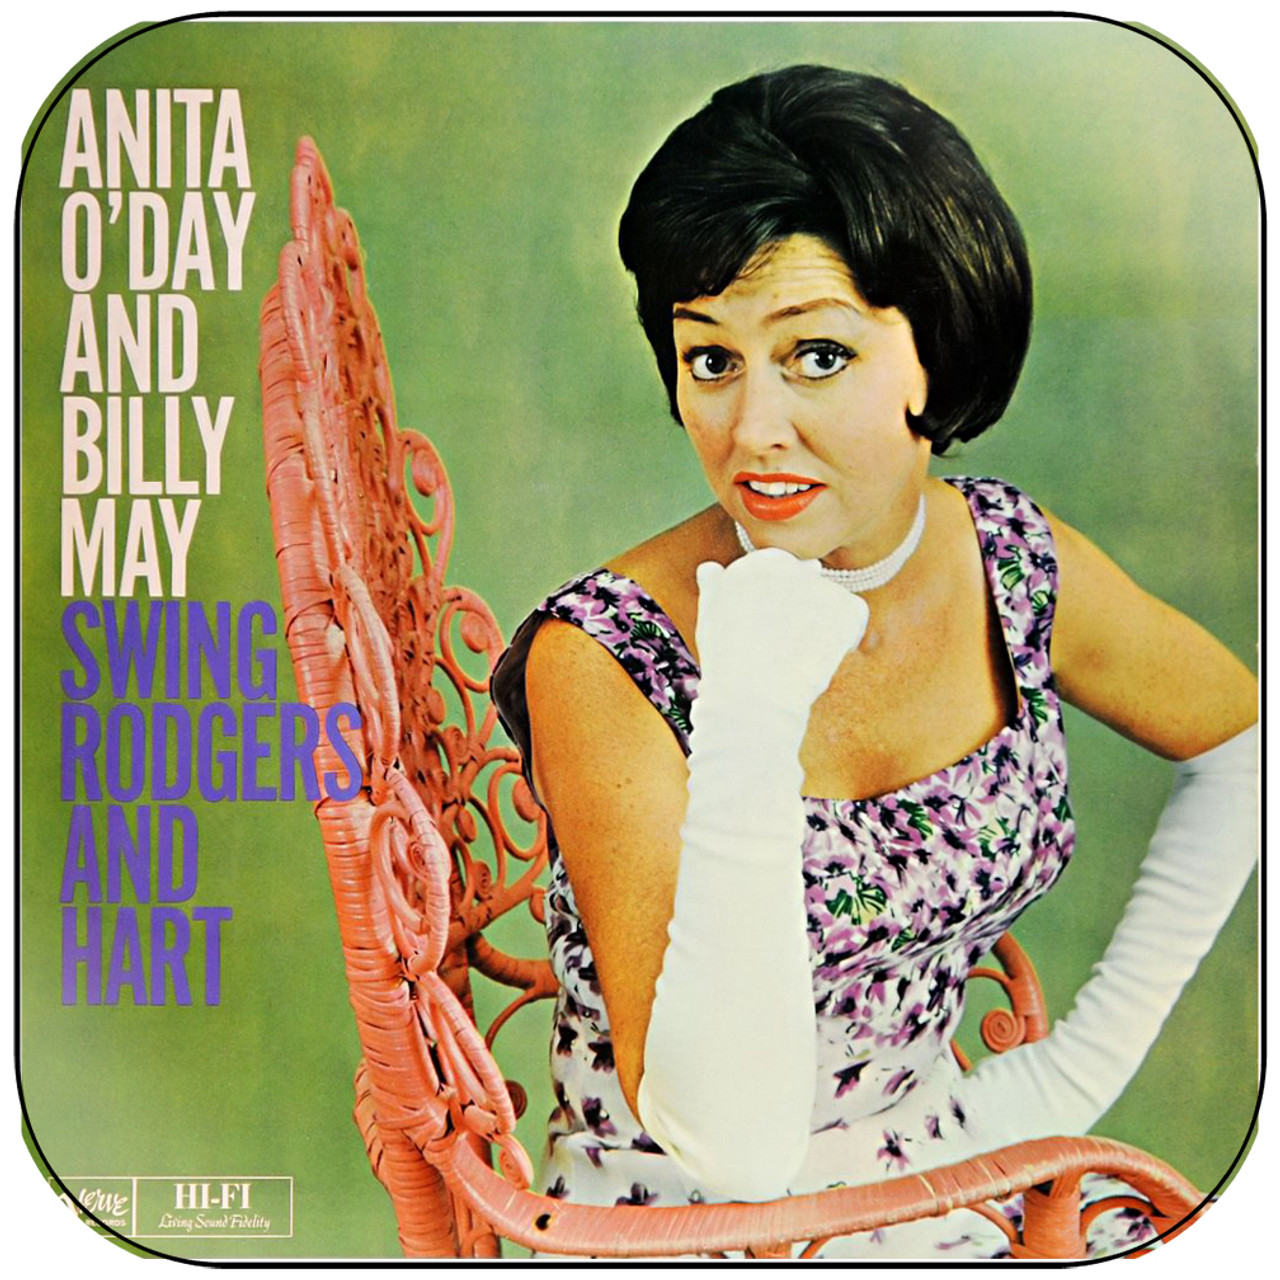 Anita O'Day - Anita Oday And Billy May Swing Rodgers And Hart Album Cover  Sticker